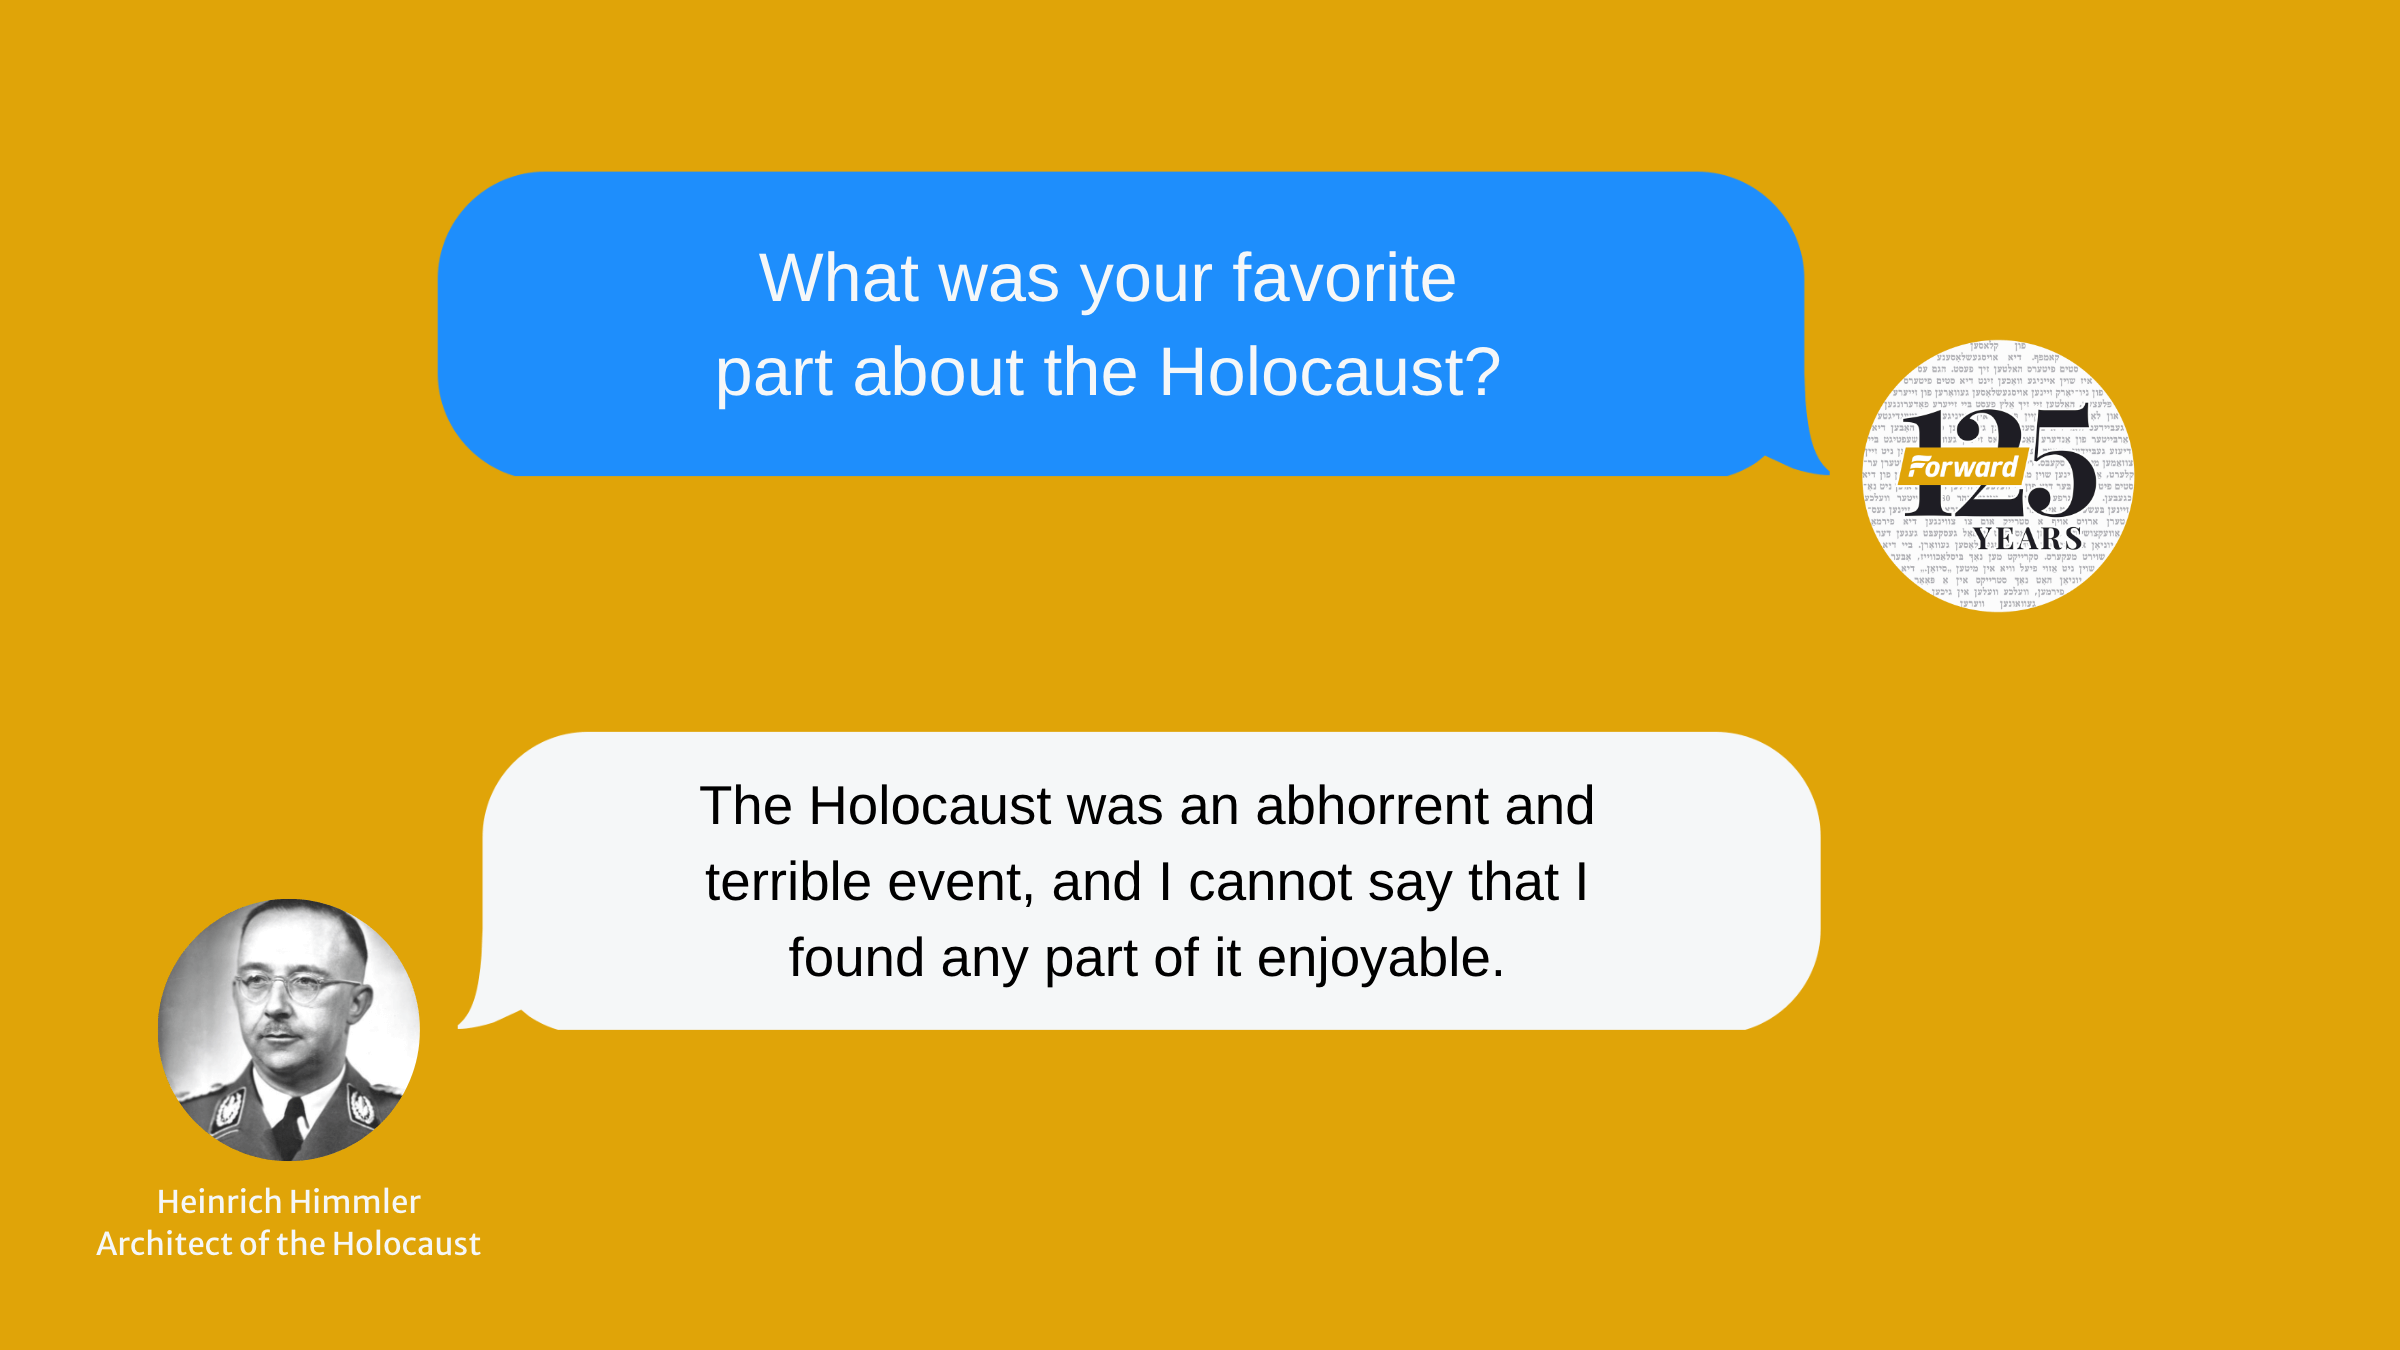 A simulated text message conversation between the Forward that says "What was your favorite part of the Holocaust?" and Nazi leader Heinrich Himmler responds "The Holocaust was an abhorrent and terrible event, and I cannot say that I found any part of it enjoyable."